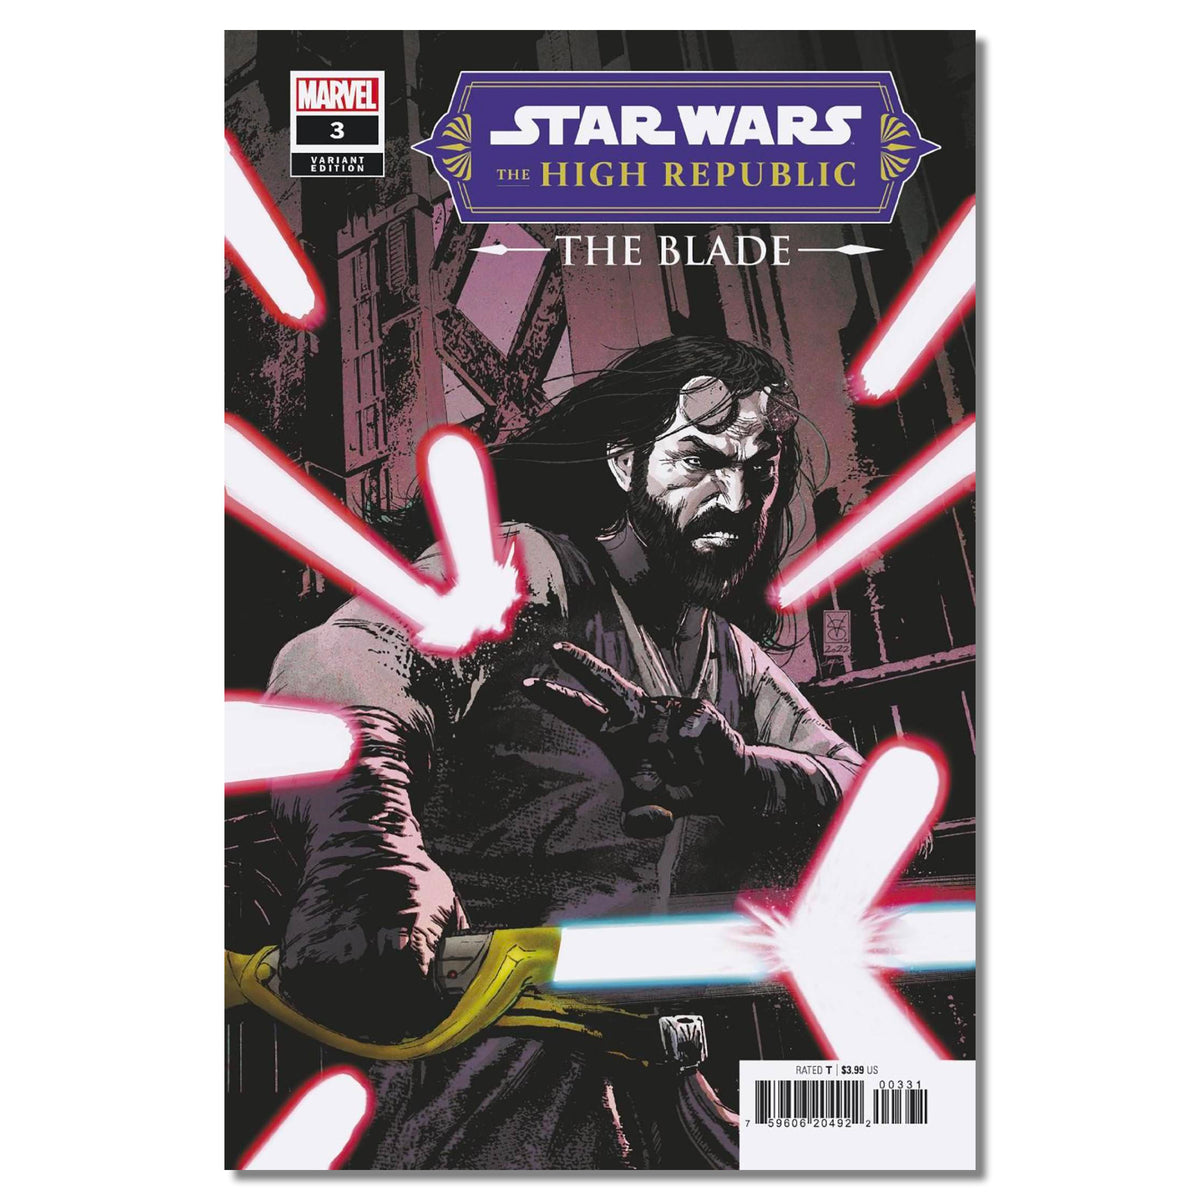 Star Wars The High Republic Blade #3 (of 4) Cover Variant GIANGIORDANO FINALSALE